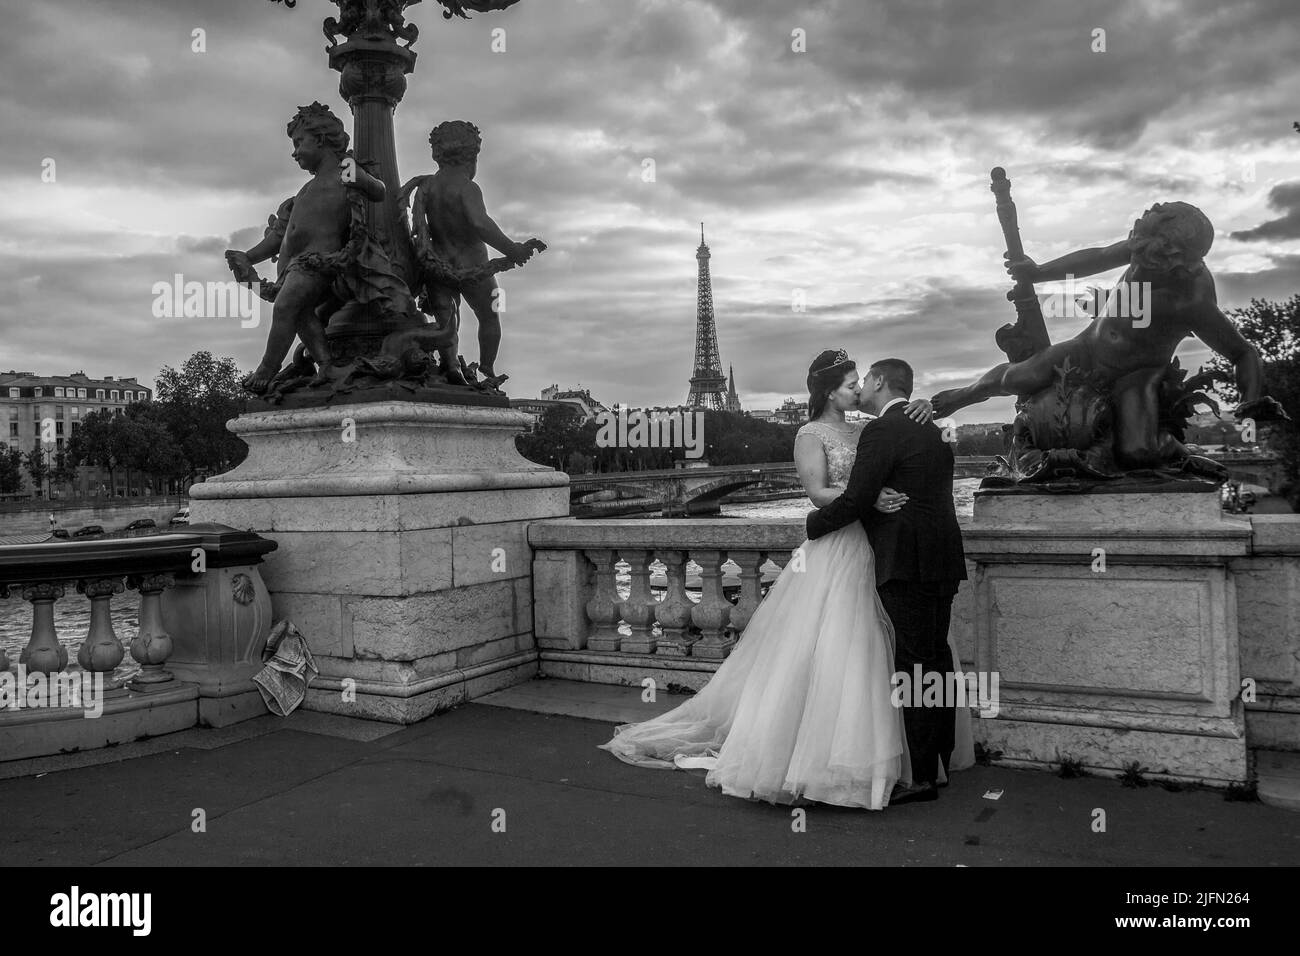 14-05-2016 Paris. Couple in love - the bride kisses the groom on the Pont Alexandre III in Paris (Eiffel Tower) at sunset Stock Photo